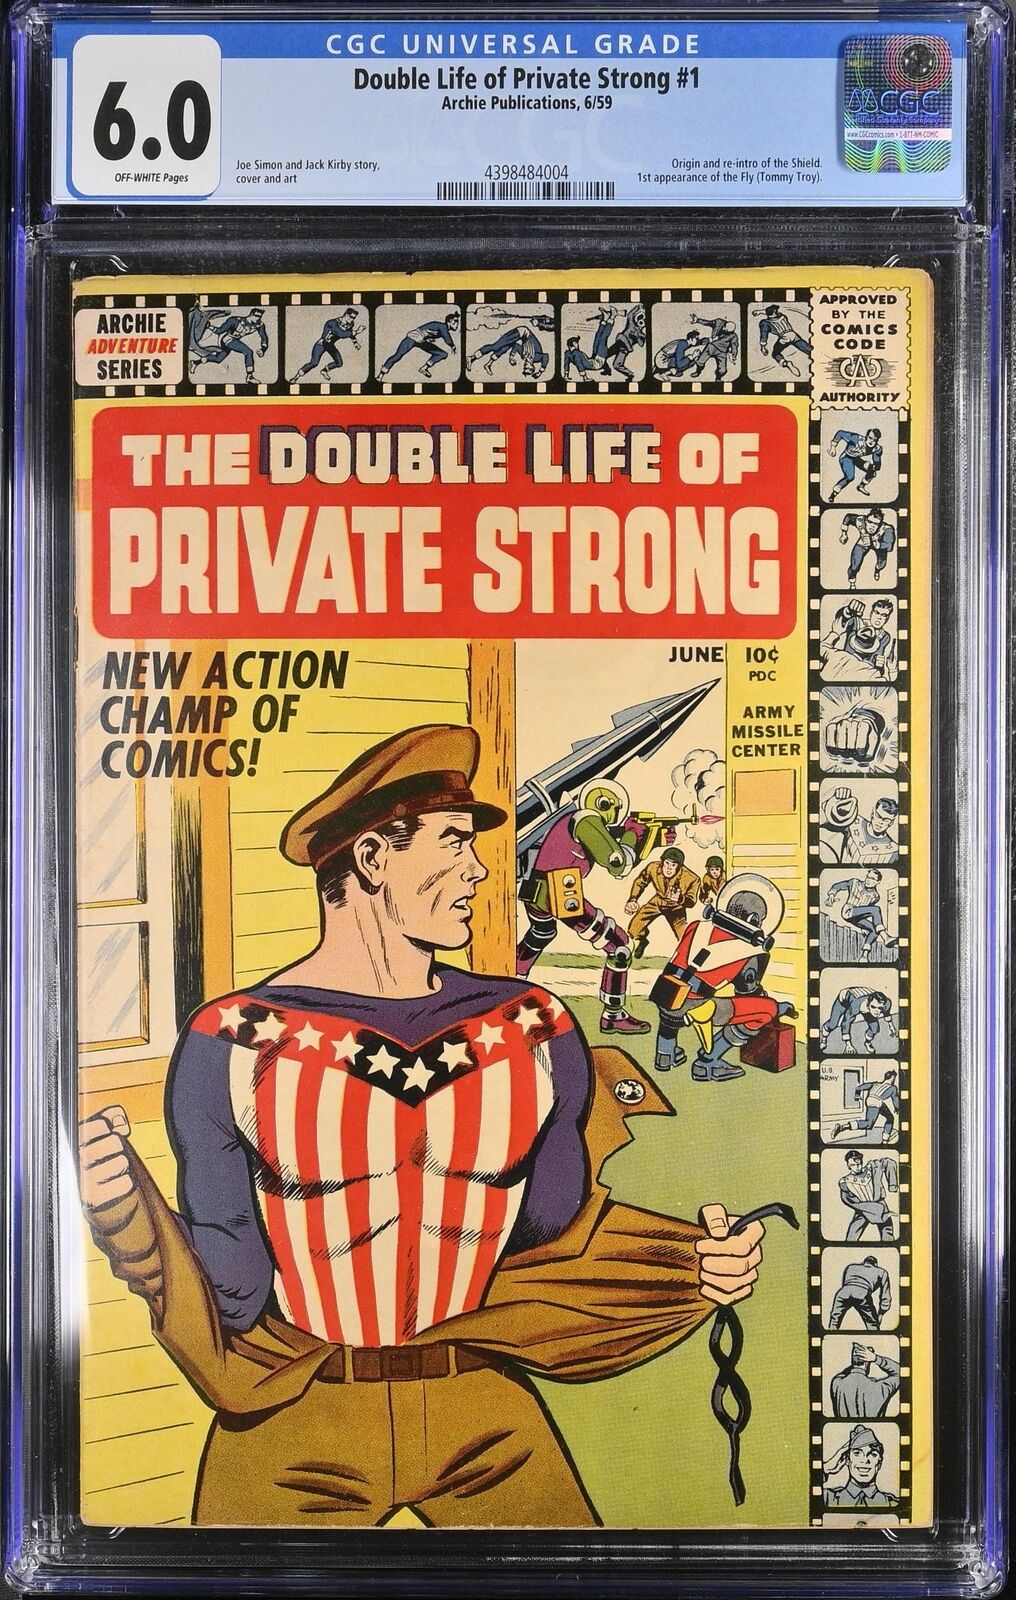 Double Life of Private Strong (1959) #1 CGC FN 6.0 Joe Simon and Jack Kirby